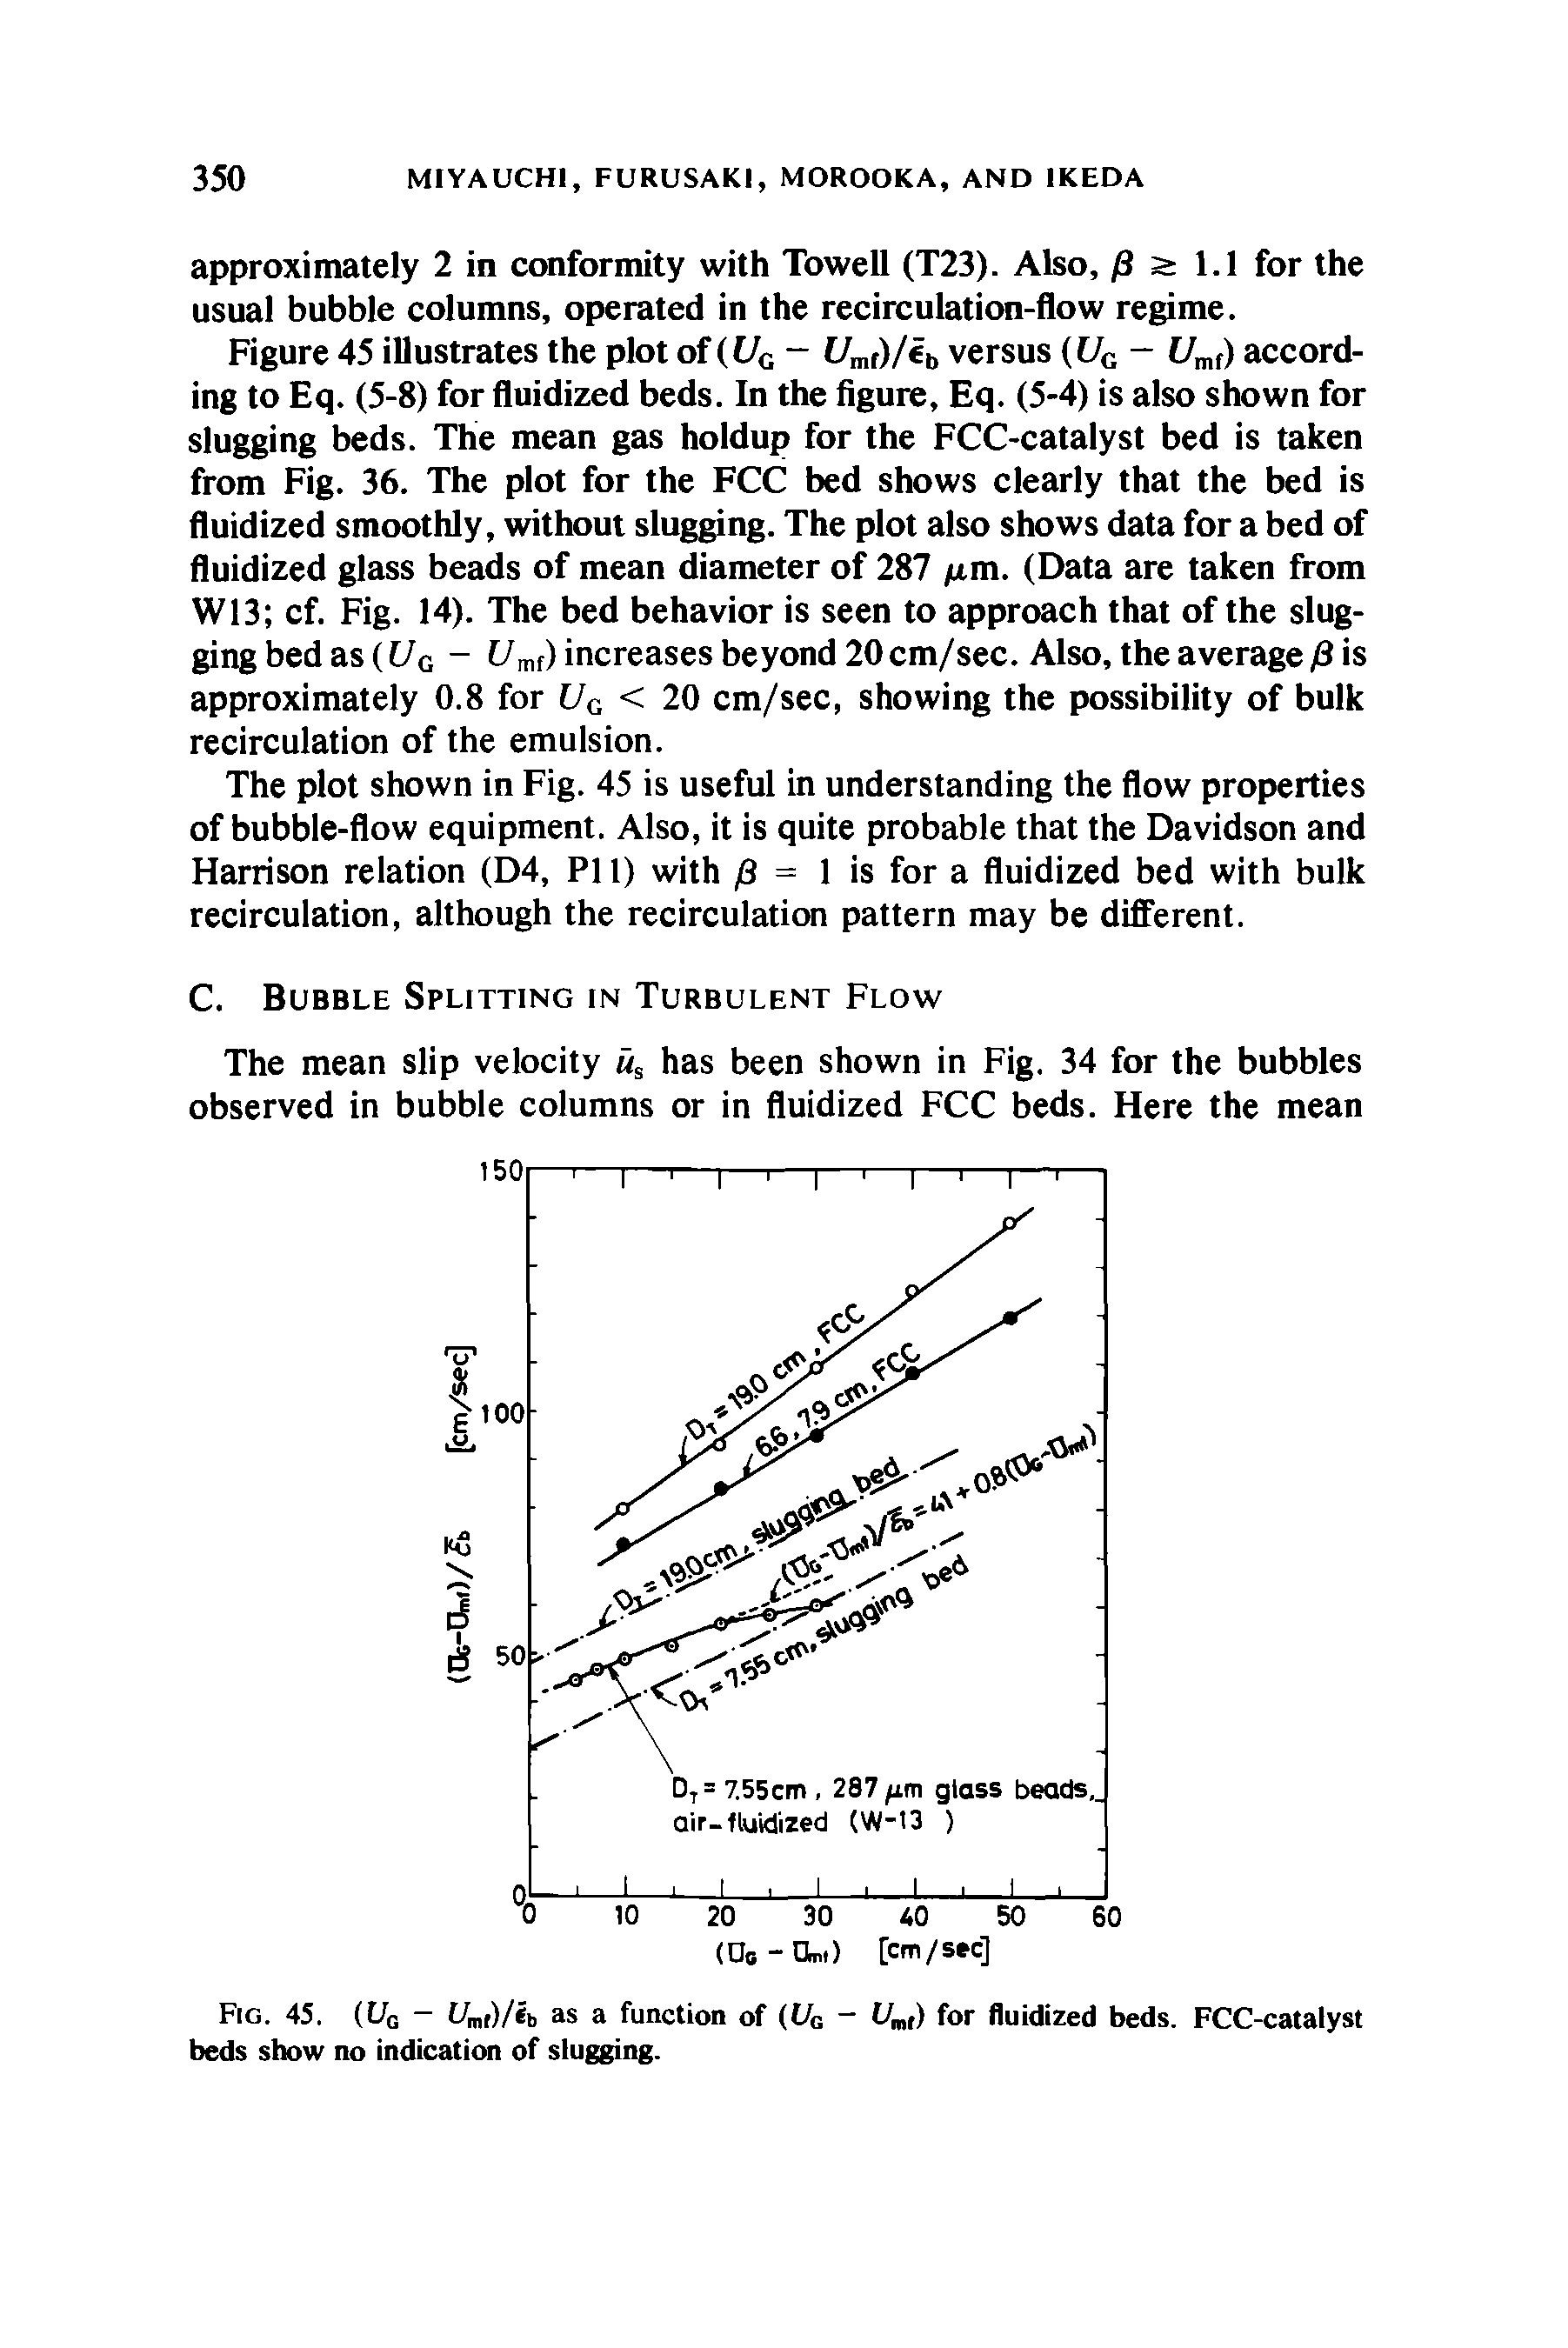 Figure 45 illustrates the plot of (f/c f mf)/cb versus (C/g Umi) according to Eq. (5-8) for fluidized beds. In the figure, Eq. (5-4) is also shown for slugging beds. The mean gas holdup for the FCC-catalyst bed is taken from Fig. 36. The plot for the FCC bed shows clearly that the bed is fluidized smoothly, without slugging. The plot also shows data for a bed of fluidized glass beads of mean diameter of 287 m. (Data are taken from W13 cf. Fig. 14). The bed behavior is seen to approach that of the slugging bed as(f/c f/mf) increases beyond 20cm/sec. Also, the averagers is approximately 0.8 for Uq < 20 cm/sec, showing the possibility of bulk recirculation of the emulsion.